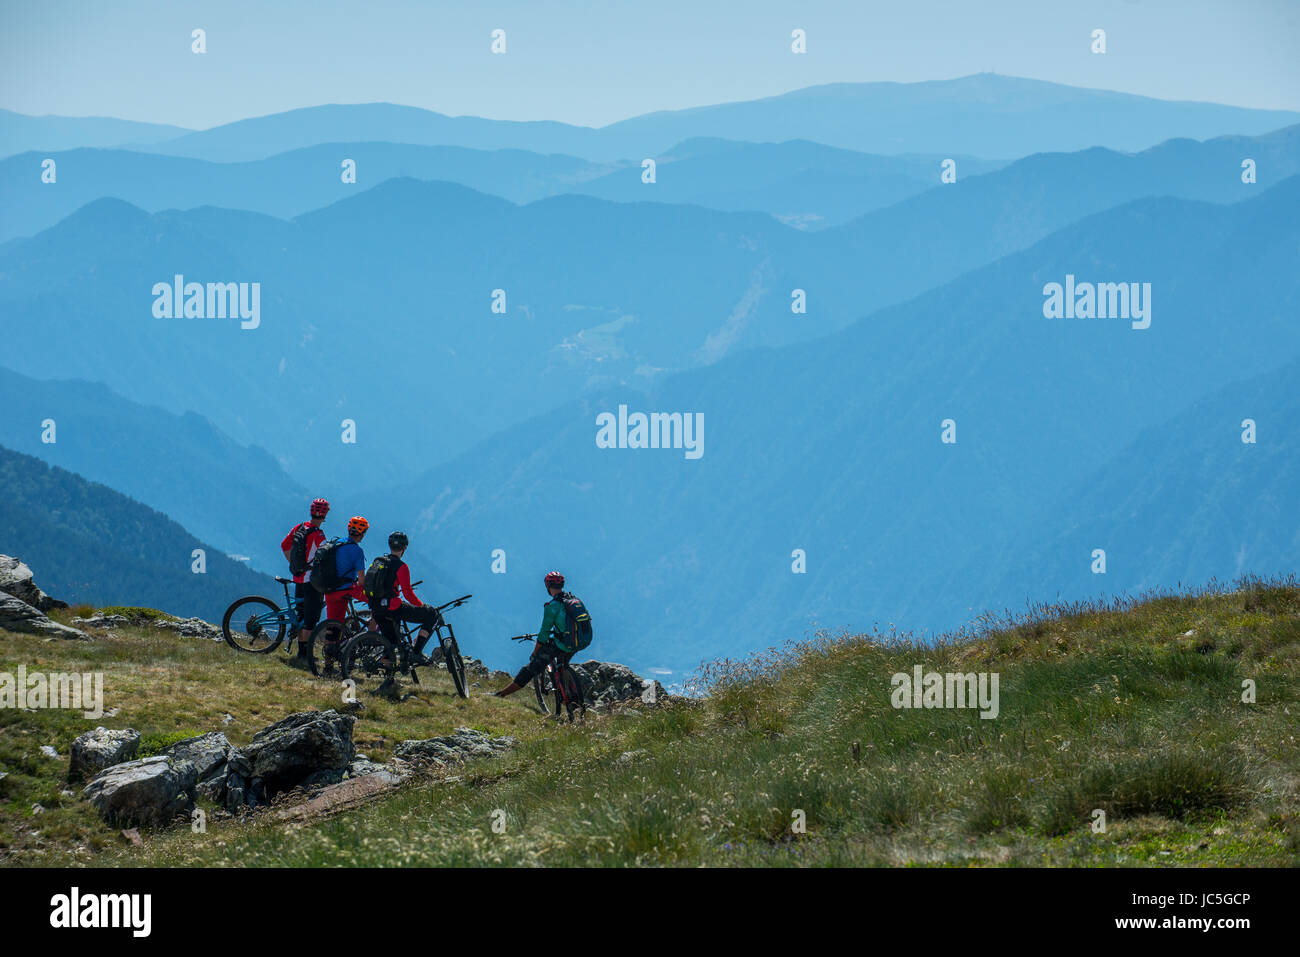 A group of mountain bikers ride a trail high in the Pyrenees, Andorra. Stock Photo